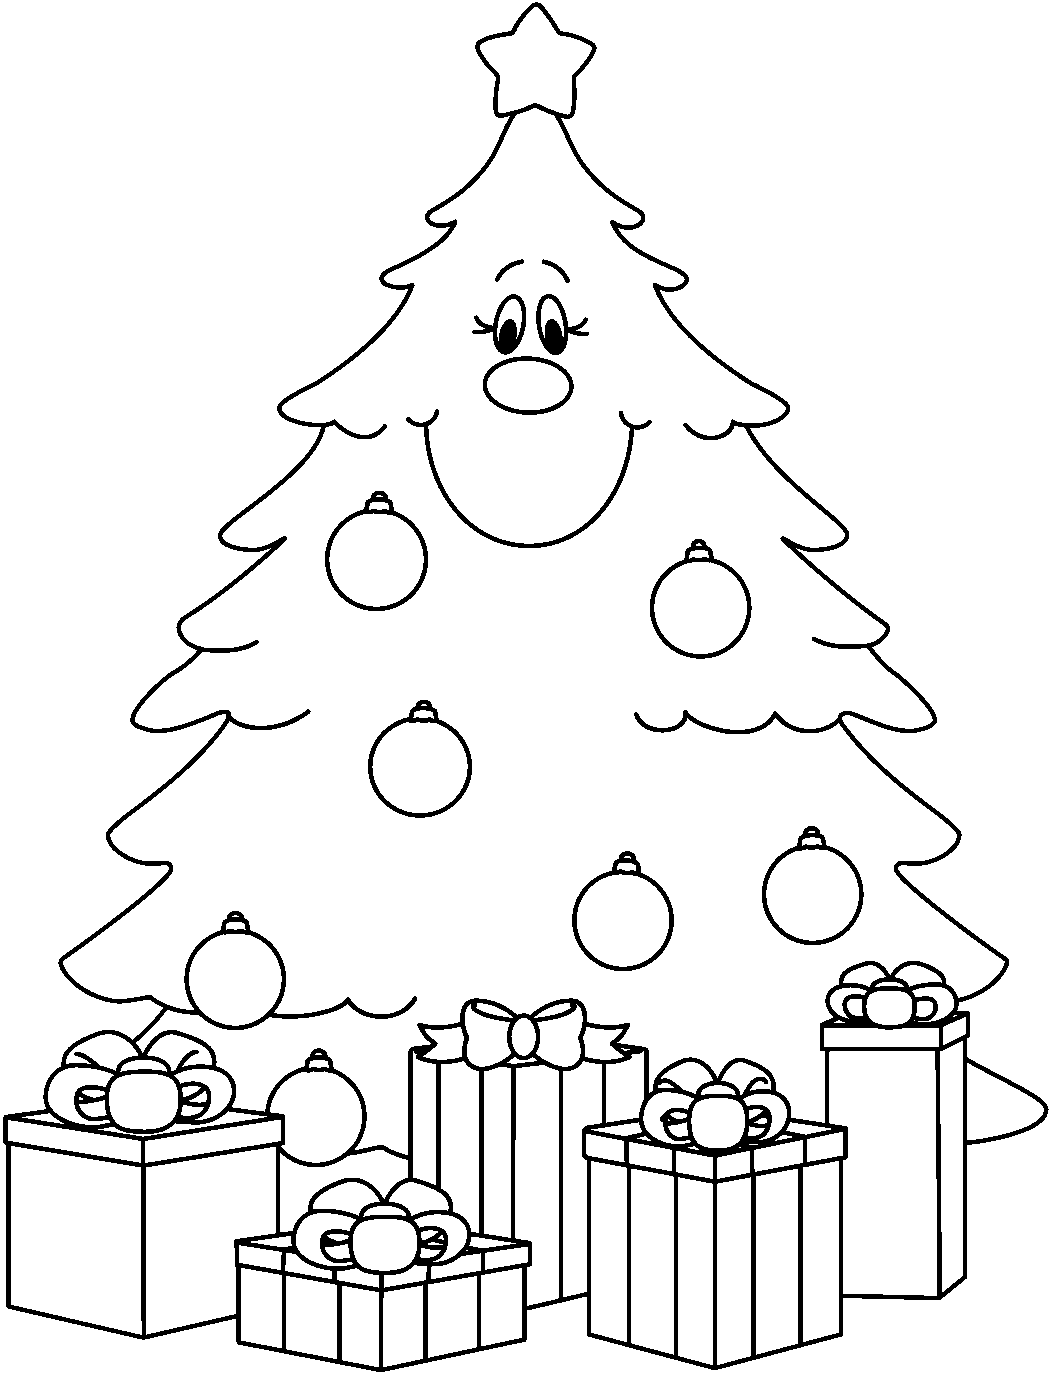 Black and White Clipart - Christmas Clip Art Black And White